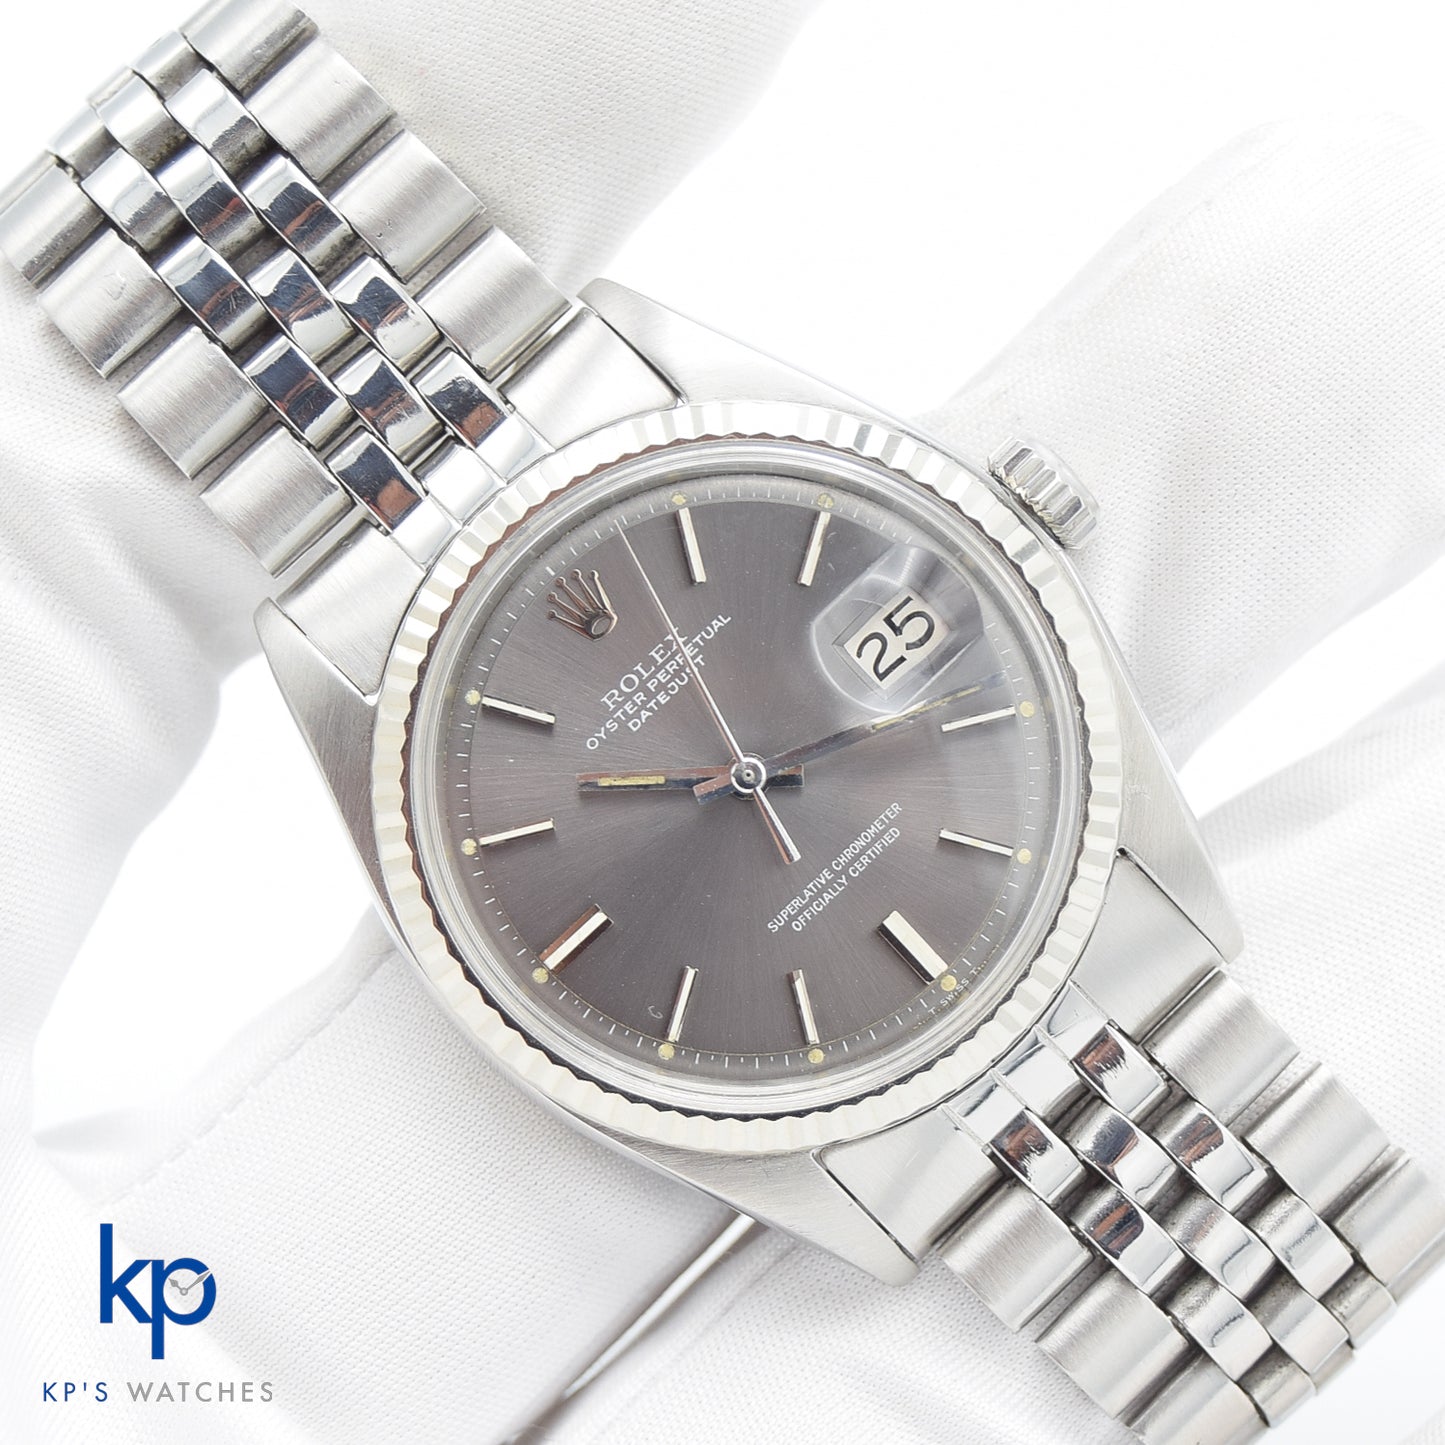 1971 Rolex Oyster Perpetual Datejust 1601